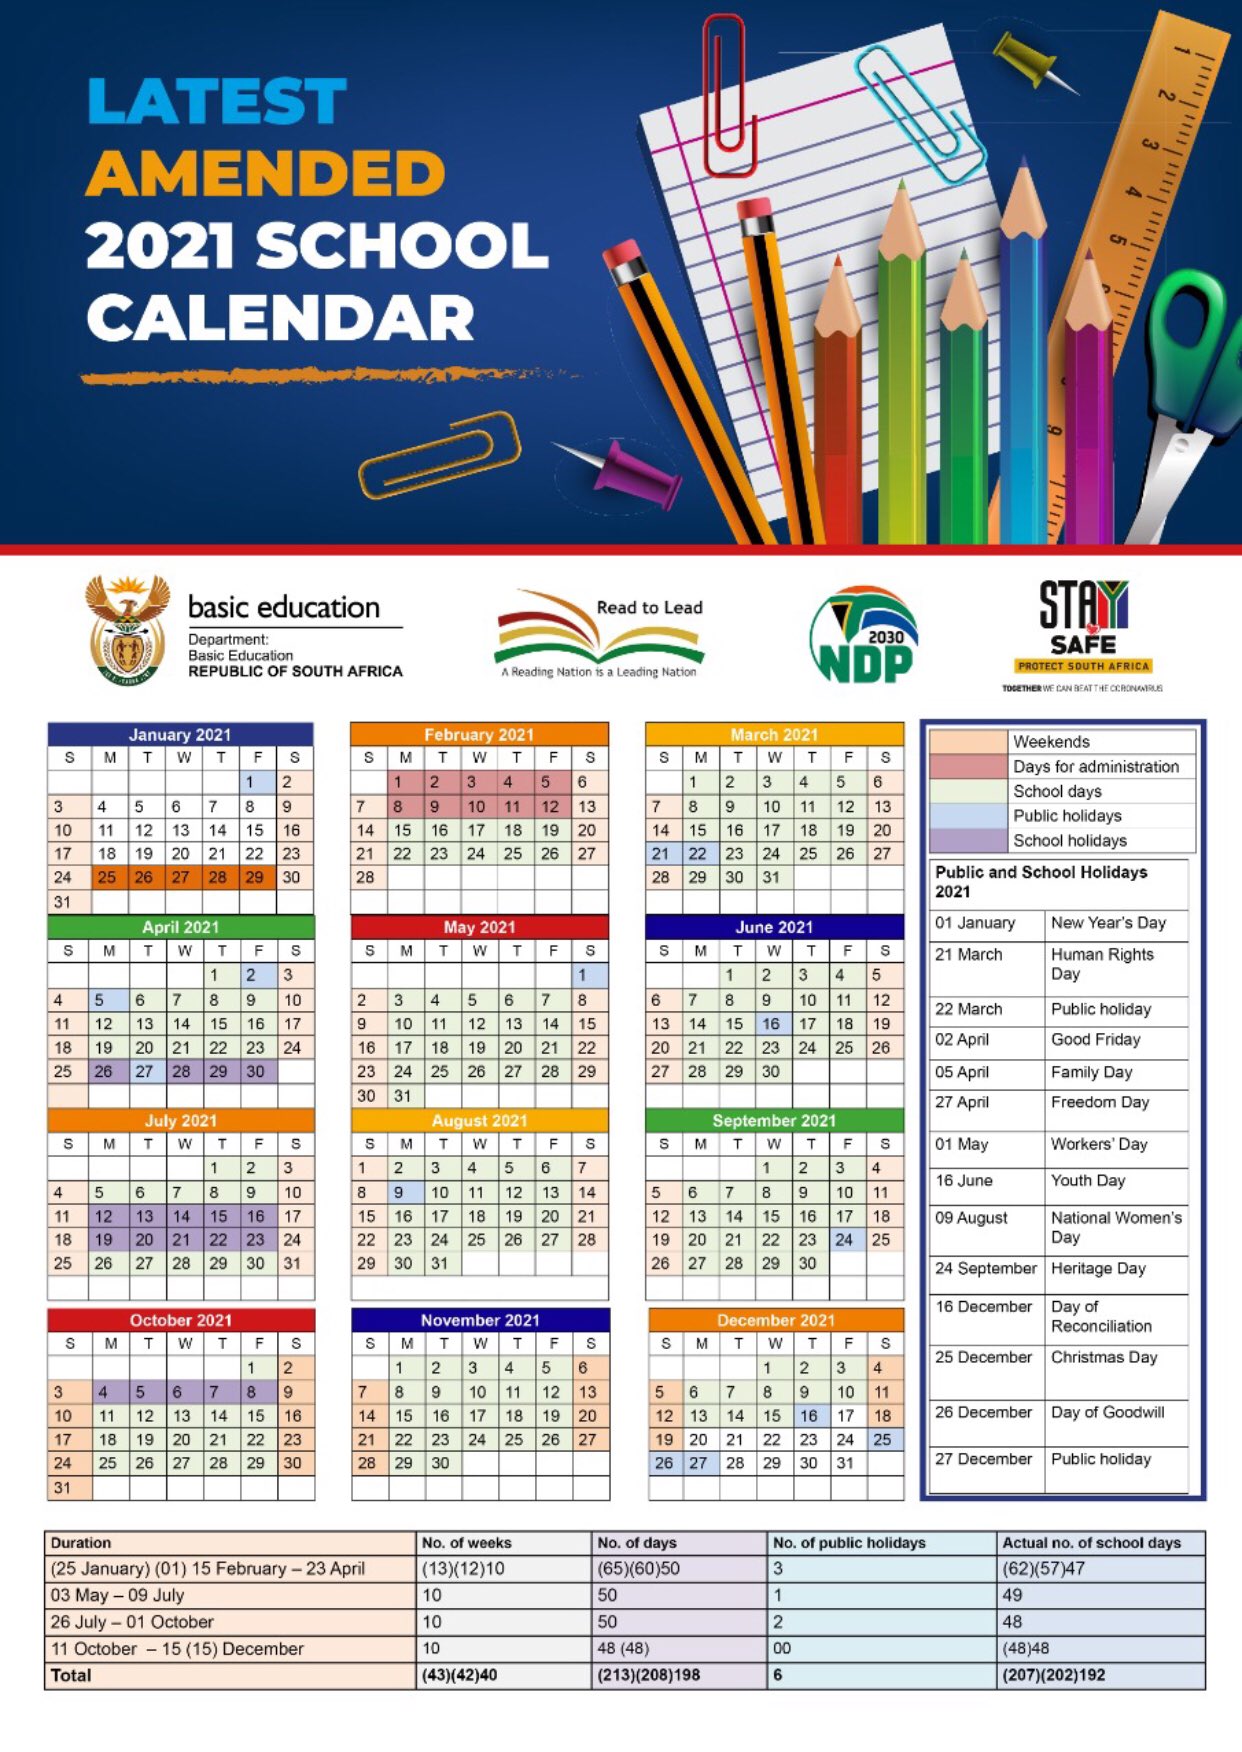 south-africa-s-amended-school-calendar-for-2021-released